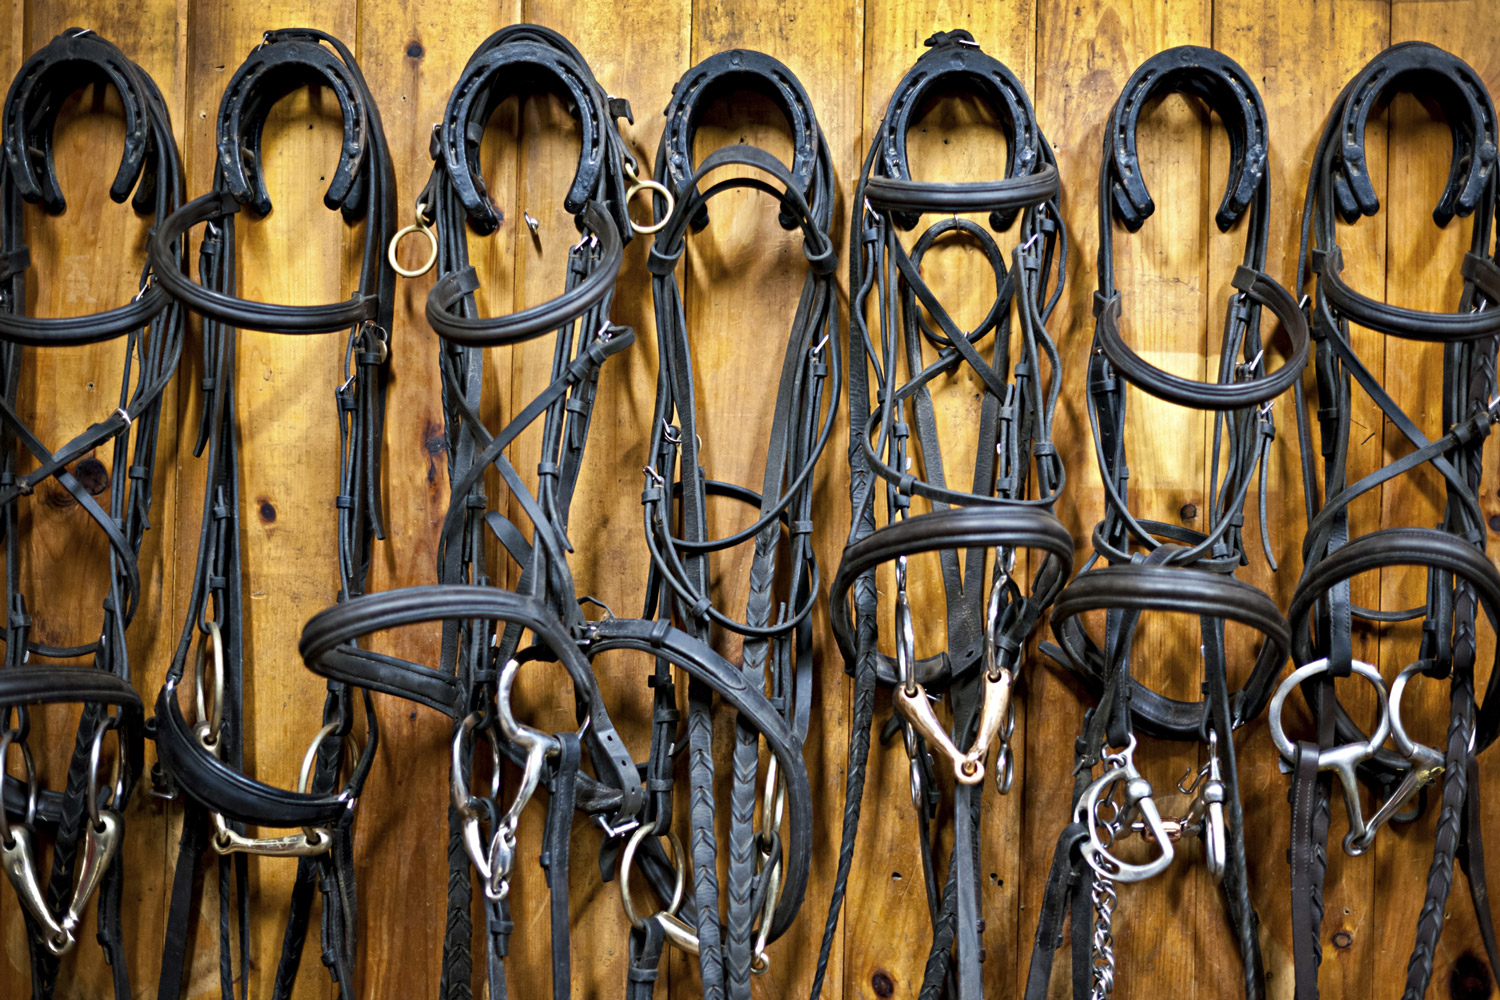 209-setting-up-your-own-tack-shop-promo-image.jpg